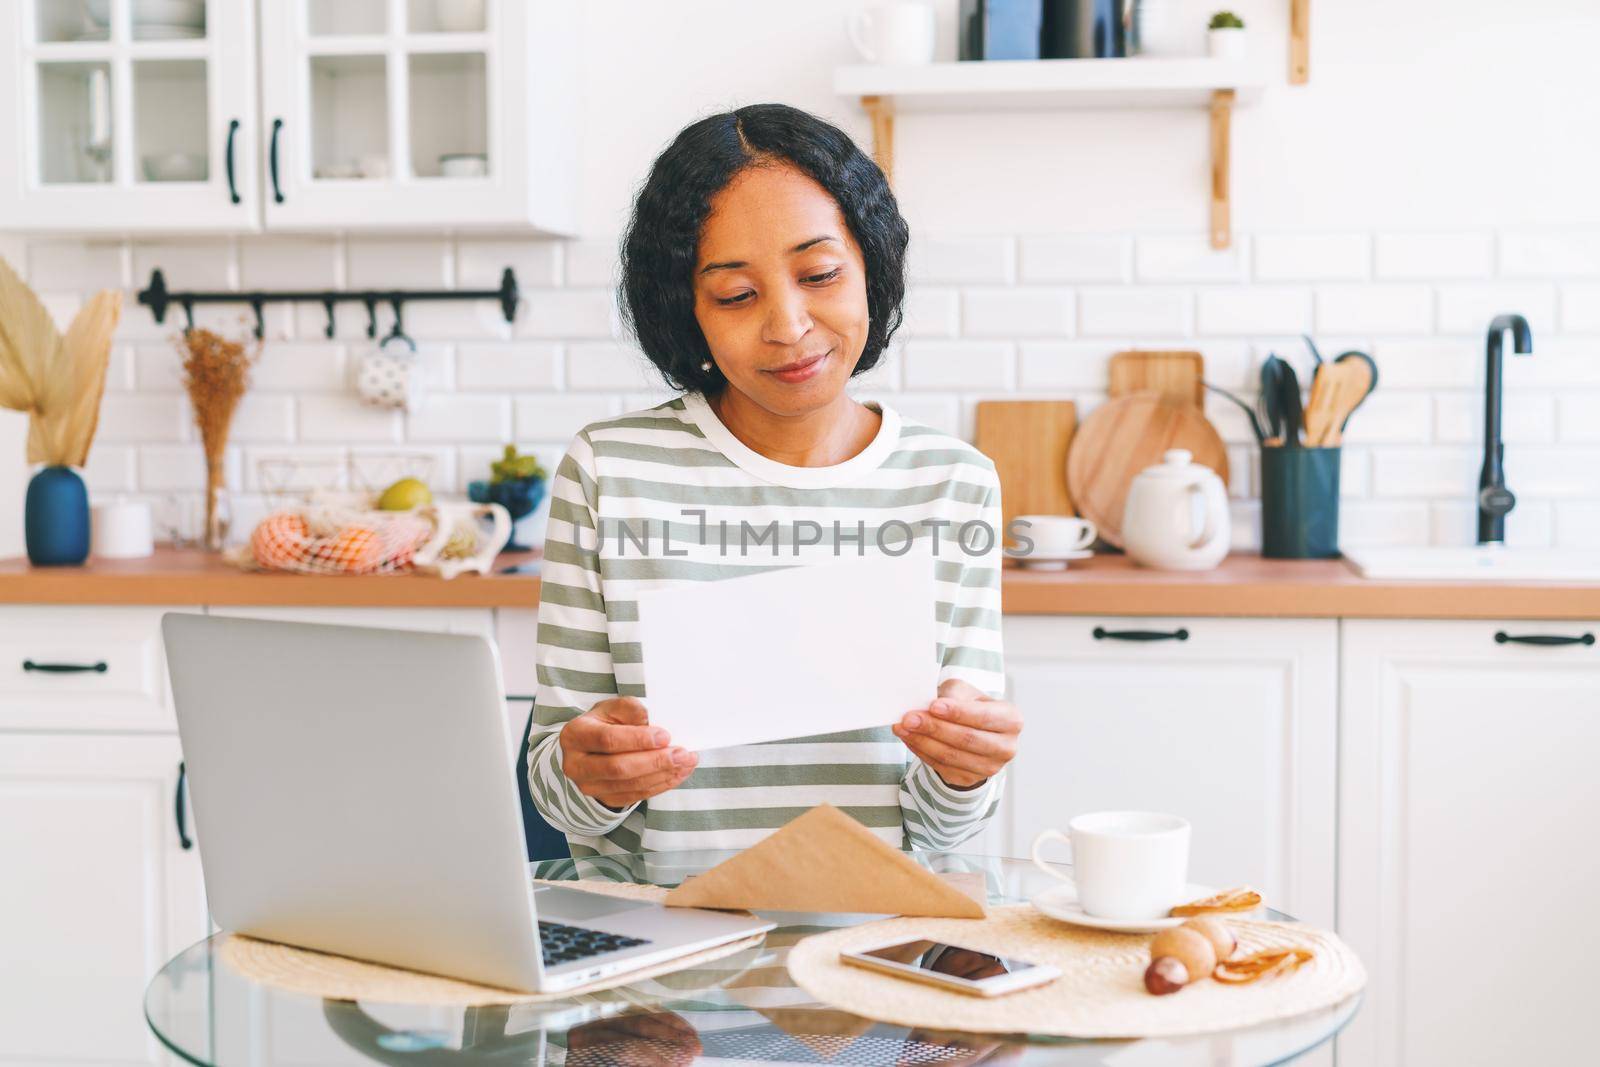 Smiling African-American woman reading paper letter in kitchen. Concept of receiving mail correspondence. Opening envelope. Postage hobby. Looking for news with enthusiasm